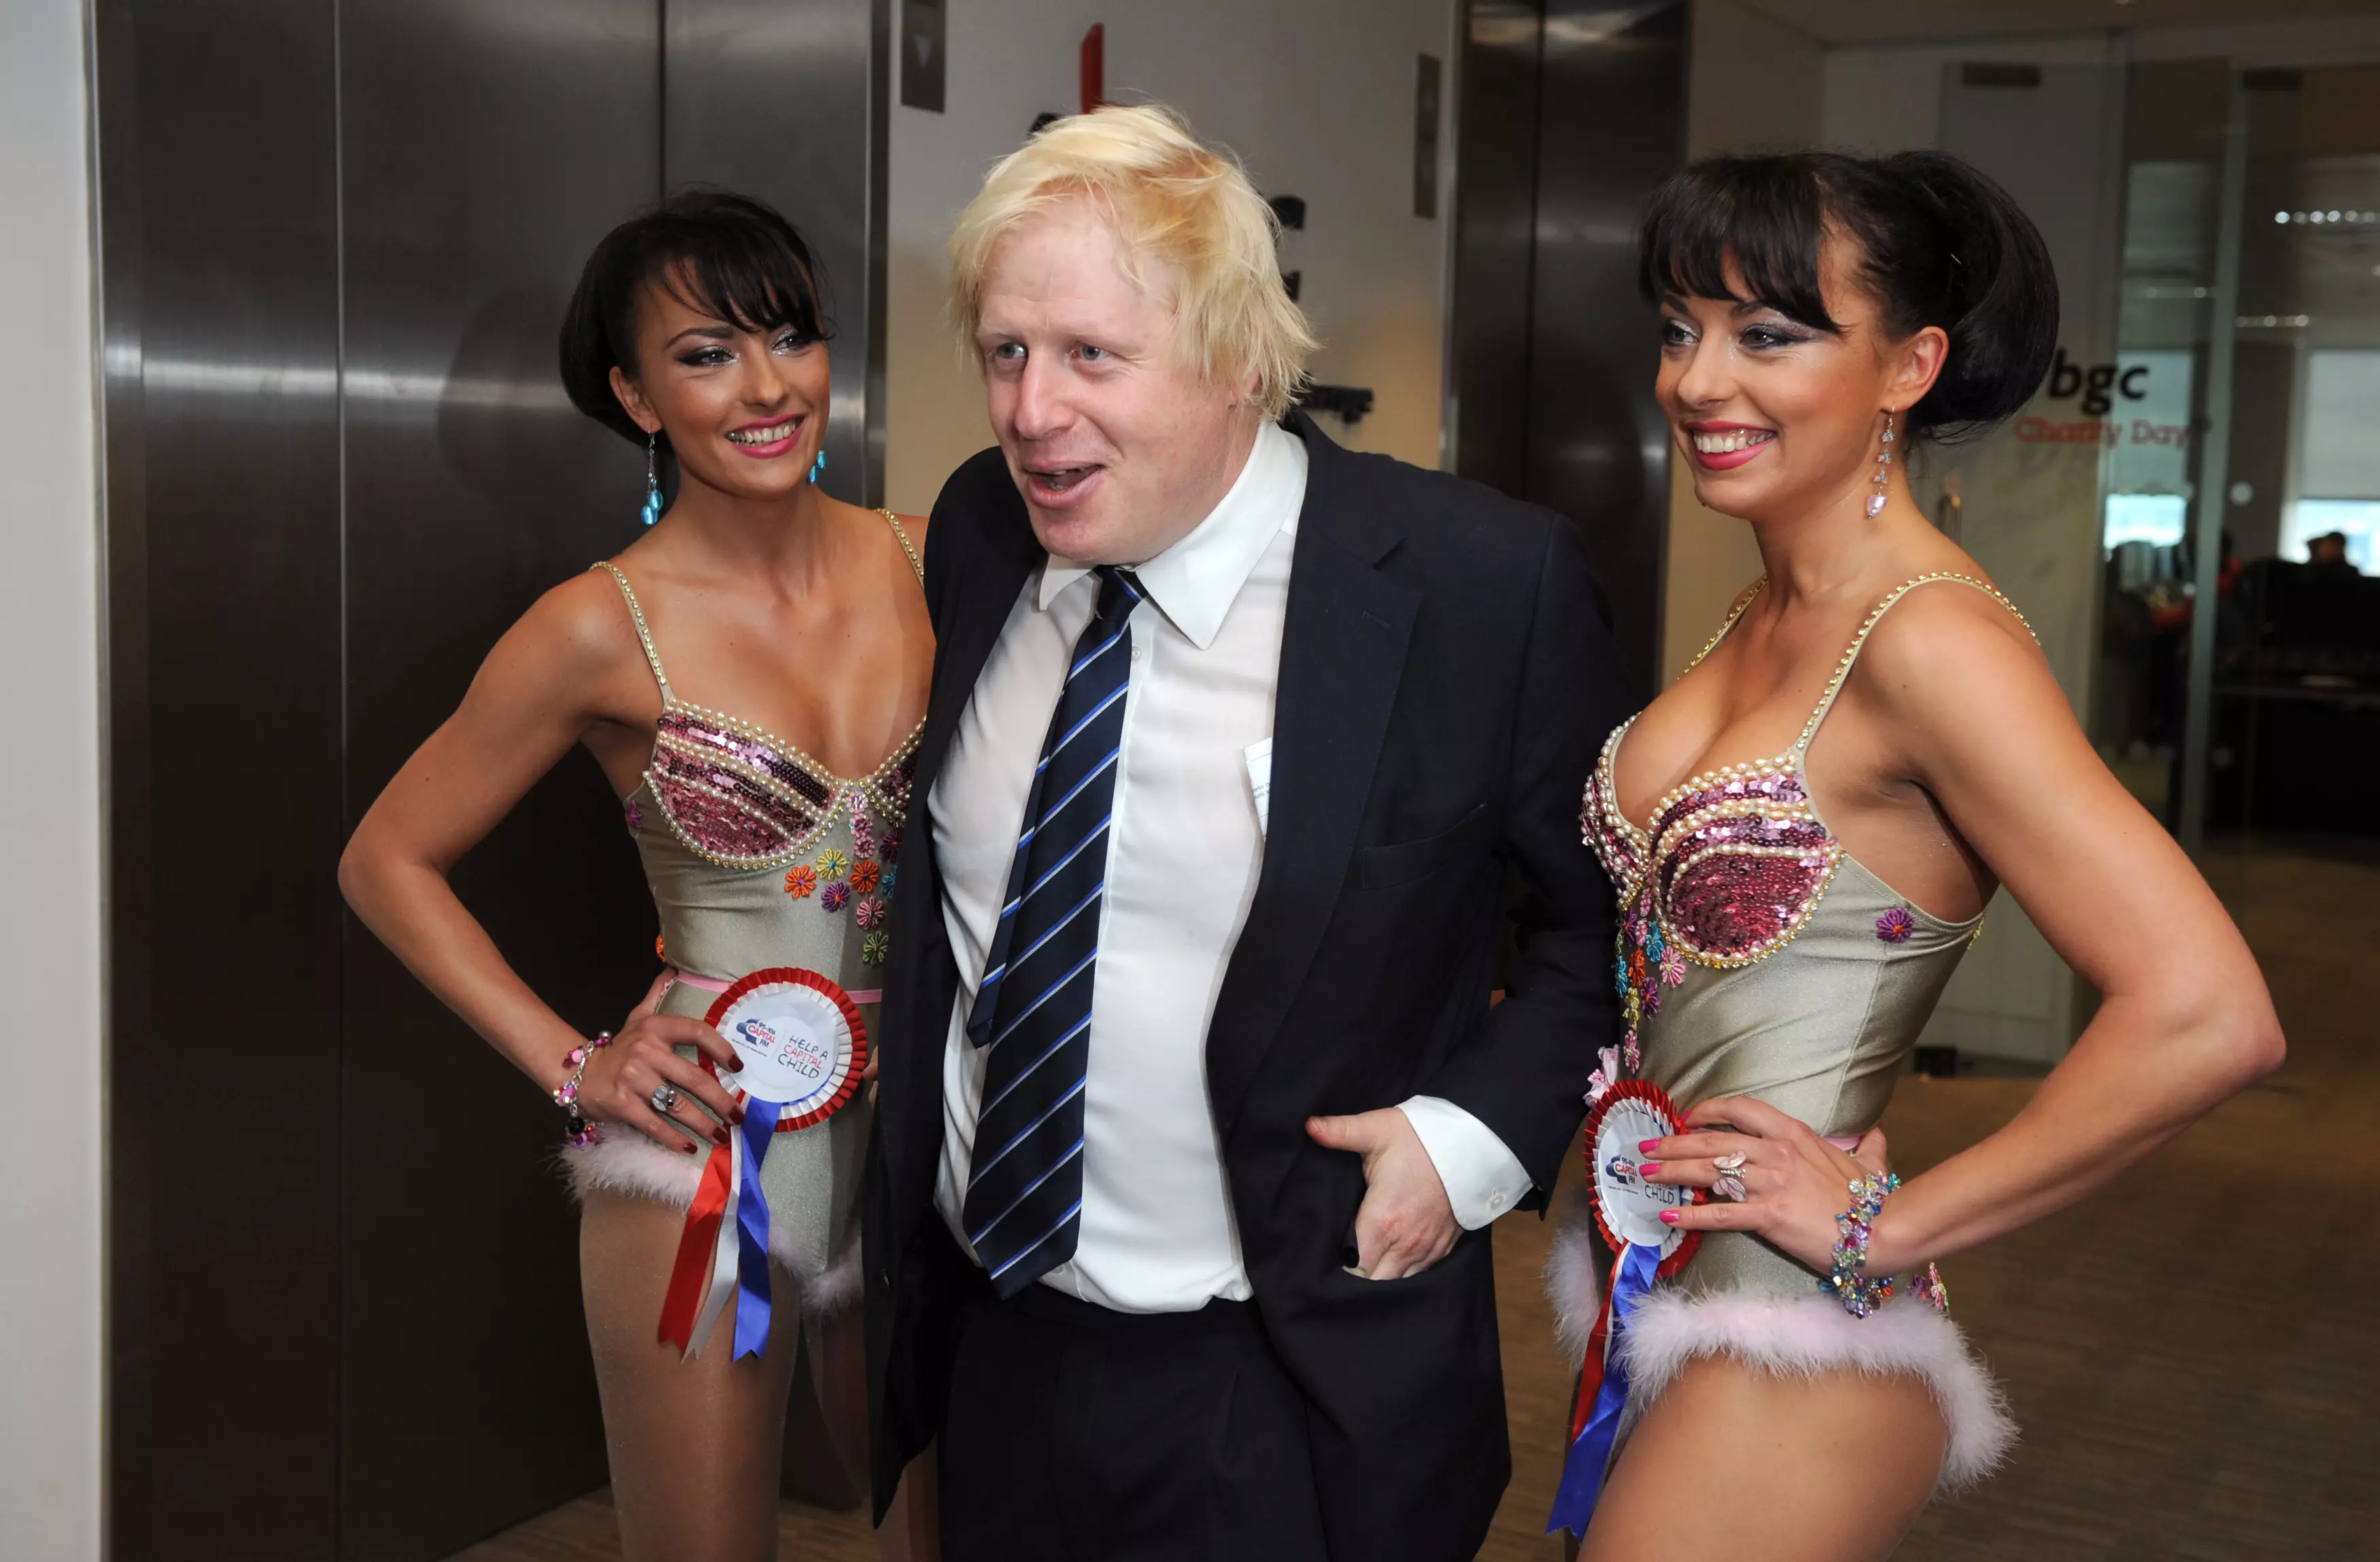 We reckon Boris would be up for the Cheeky Girls joinINg the line-up.